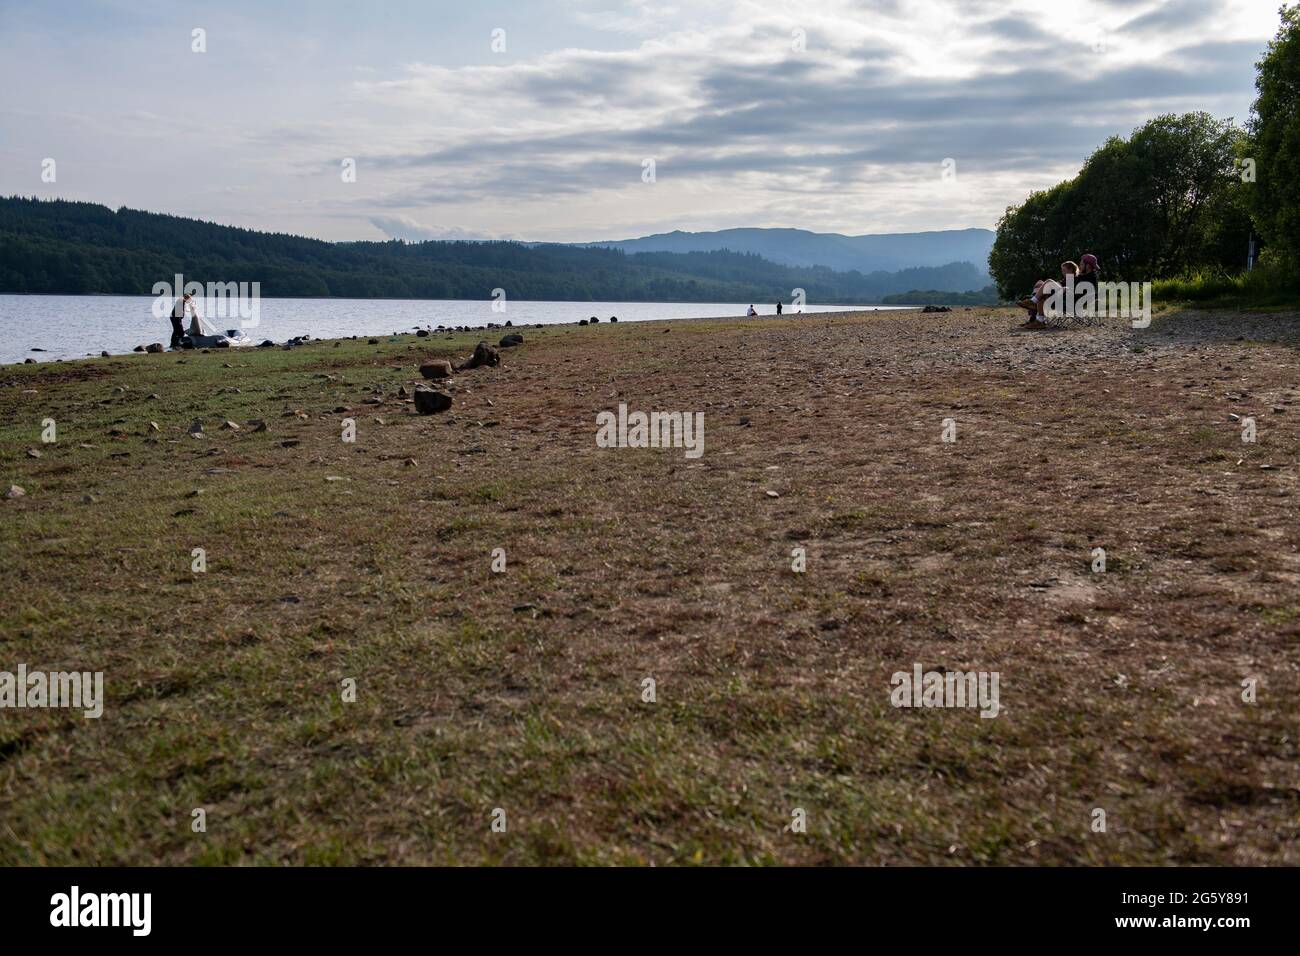 Loch Venachar, Loch. Lomonnd and Trossachs National Park, Scotland, UK. 30th June, 2021. PICTURED: A wide angle view of the pebble and stone beach on Loch Venachar which is normally under a few feet of water, is seen exposed due to the dwindling water supply being used up. There should not be any beach on this part of the loch, however people can be seen using this make shift beach to take in the evening sun shine. Credit: Colin Fisher/Alamy Live News Stock Photo